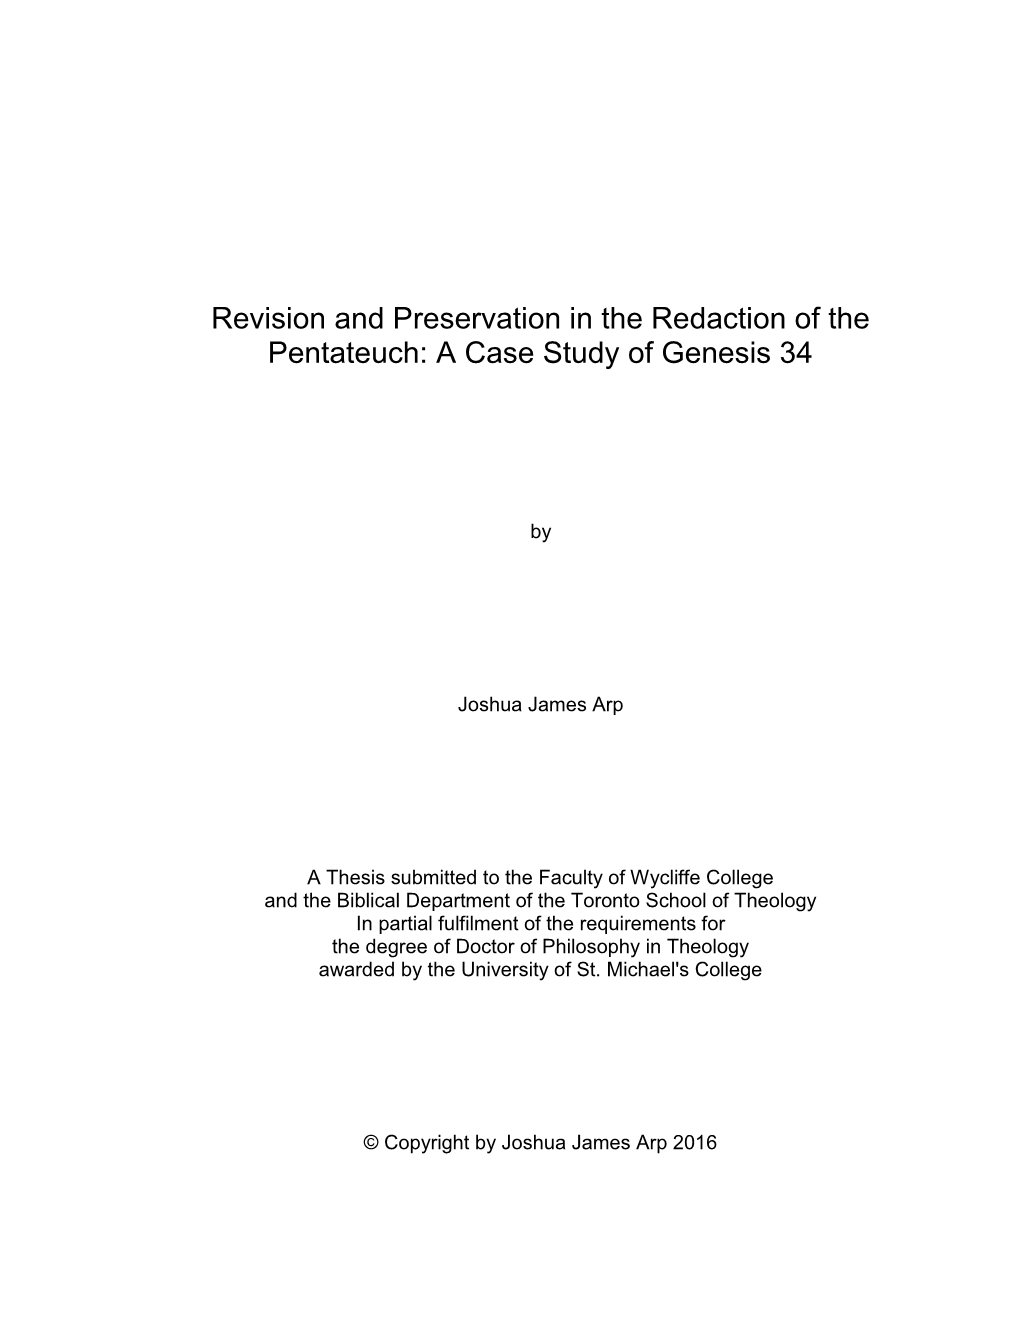 Revision and Preservation in the Redaction of the Pentateuch: a Case Study of Genesis 34